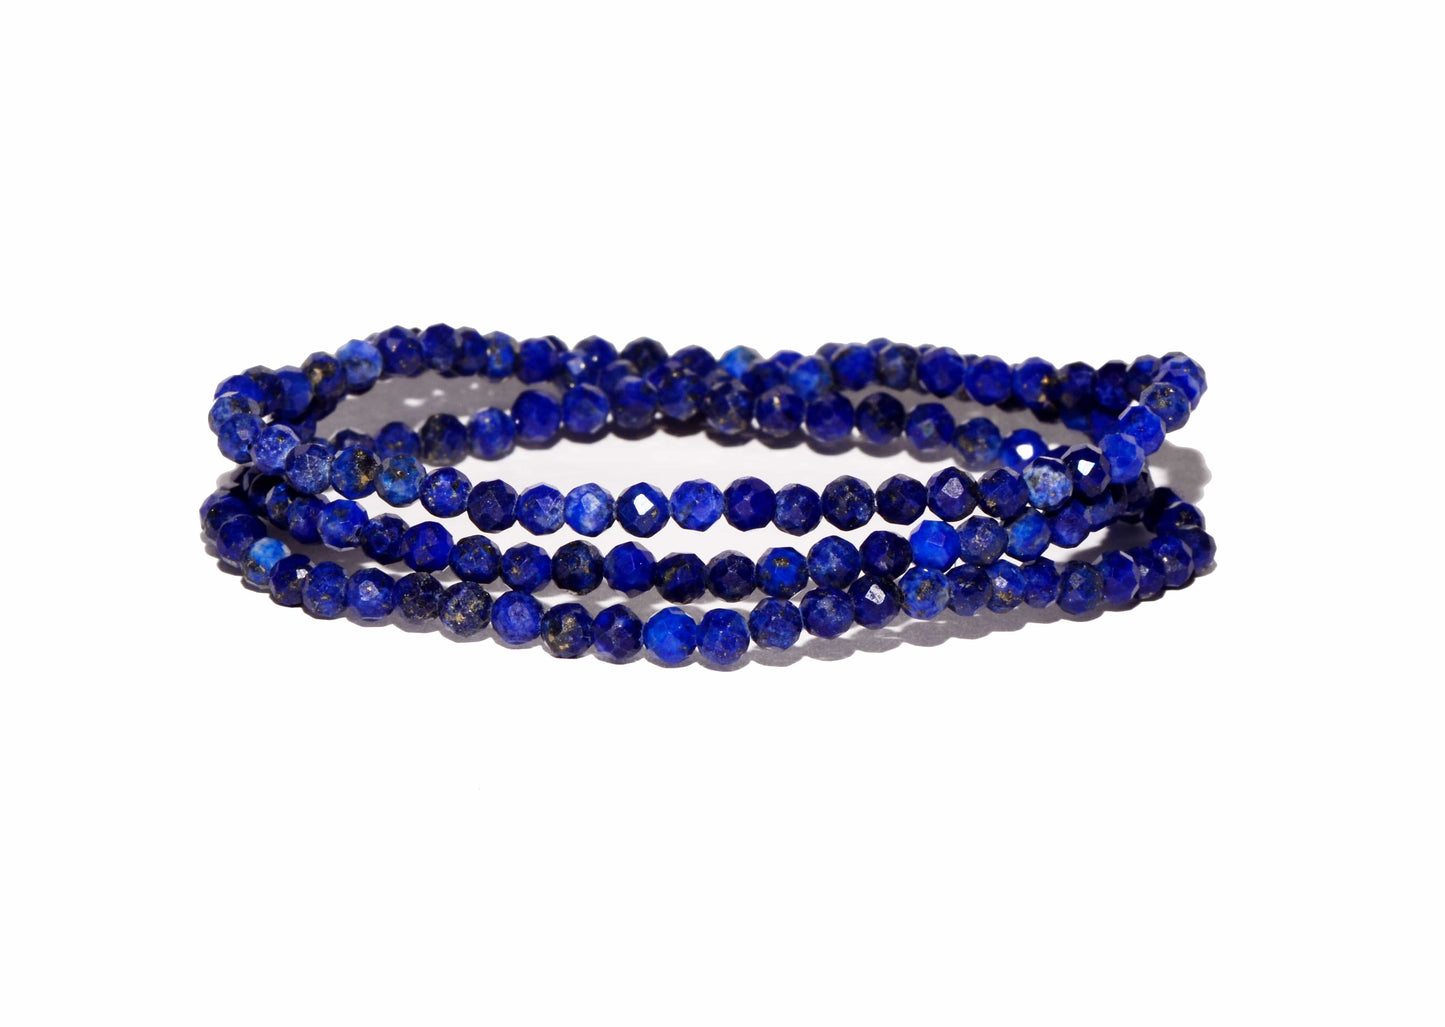 healing crystal jewelry: lapis lazuli bracelet - faceted small beads